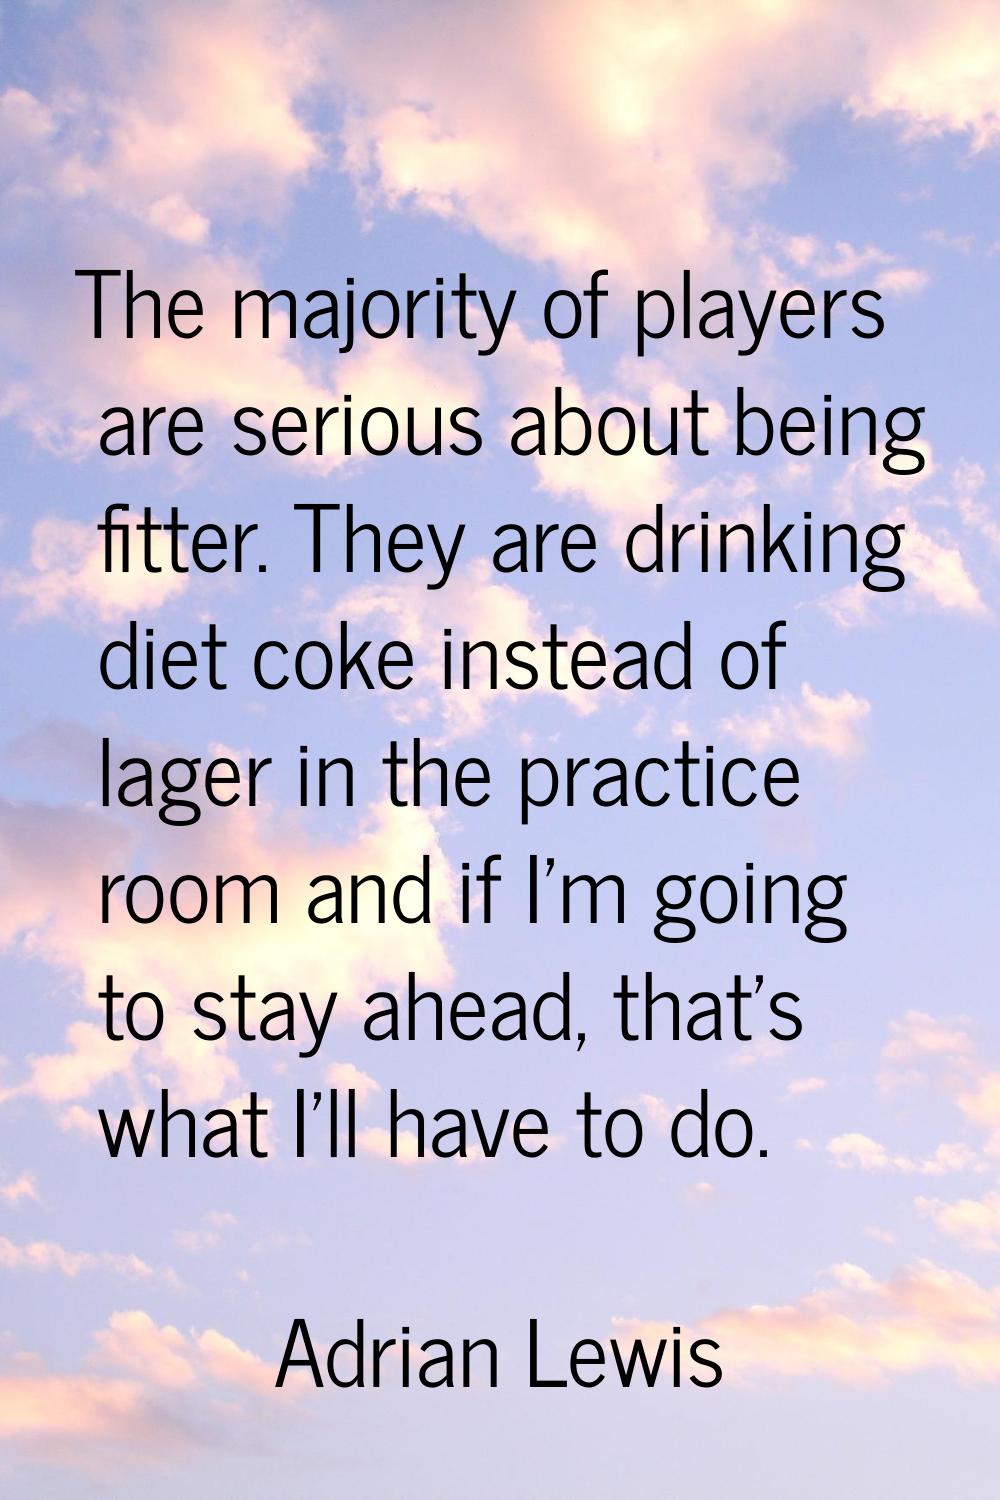 The majority of players are serious about being fitter. They are drinking diet coke instead of lage